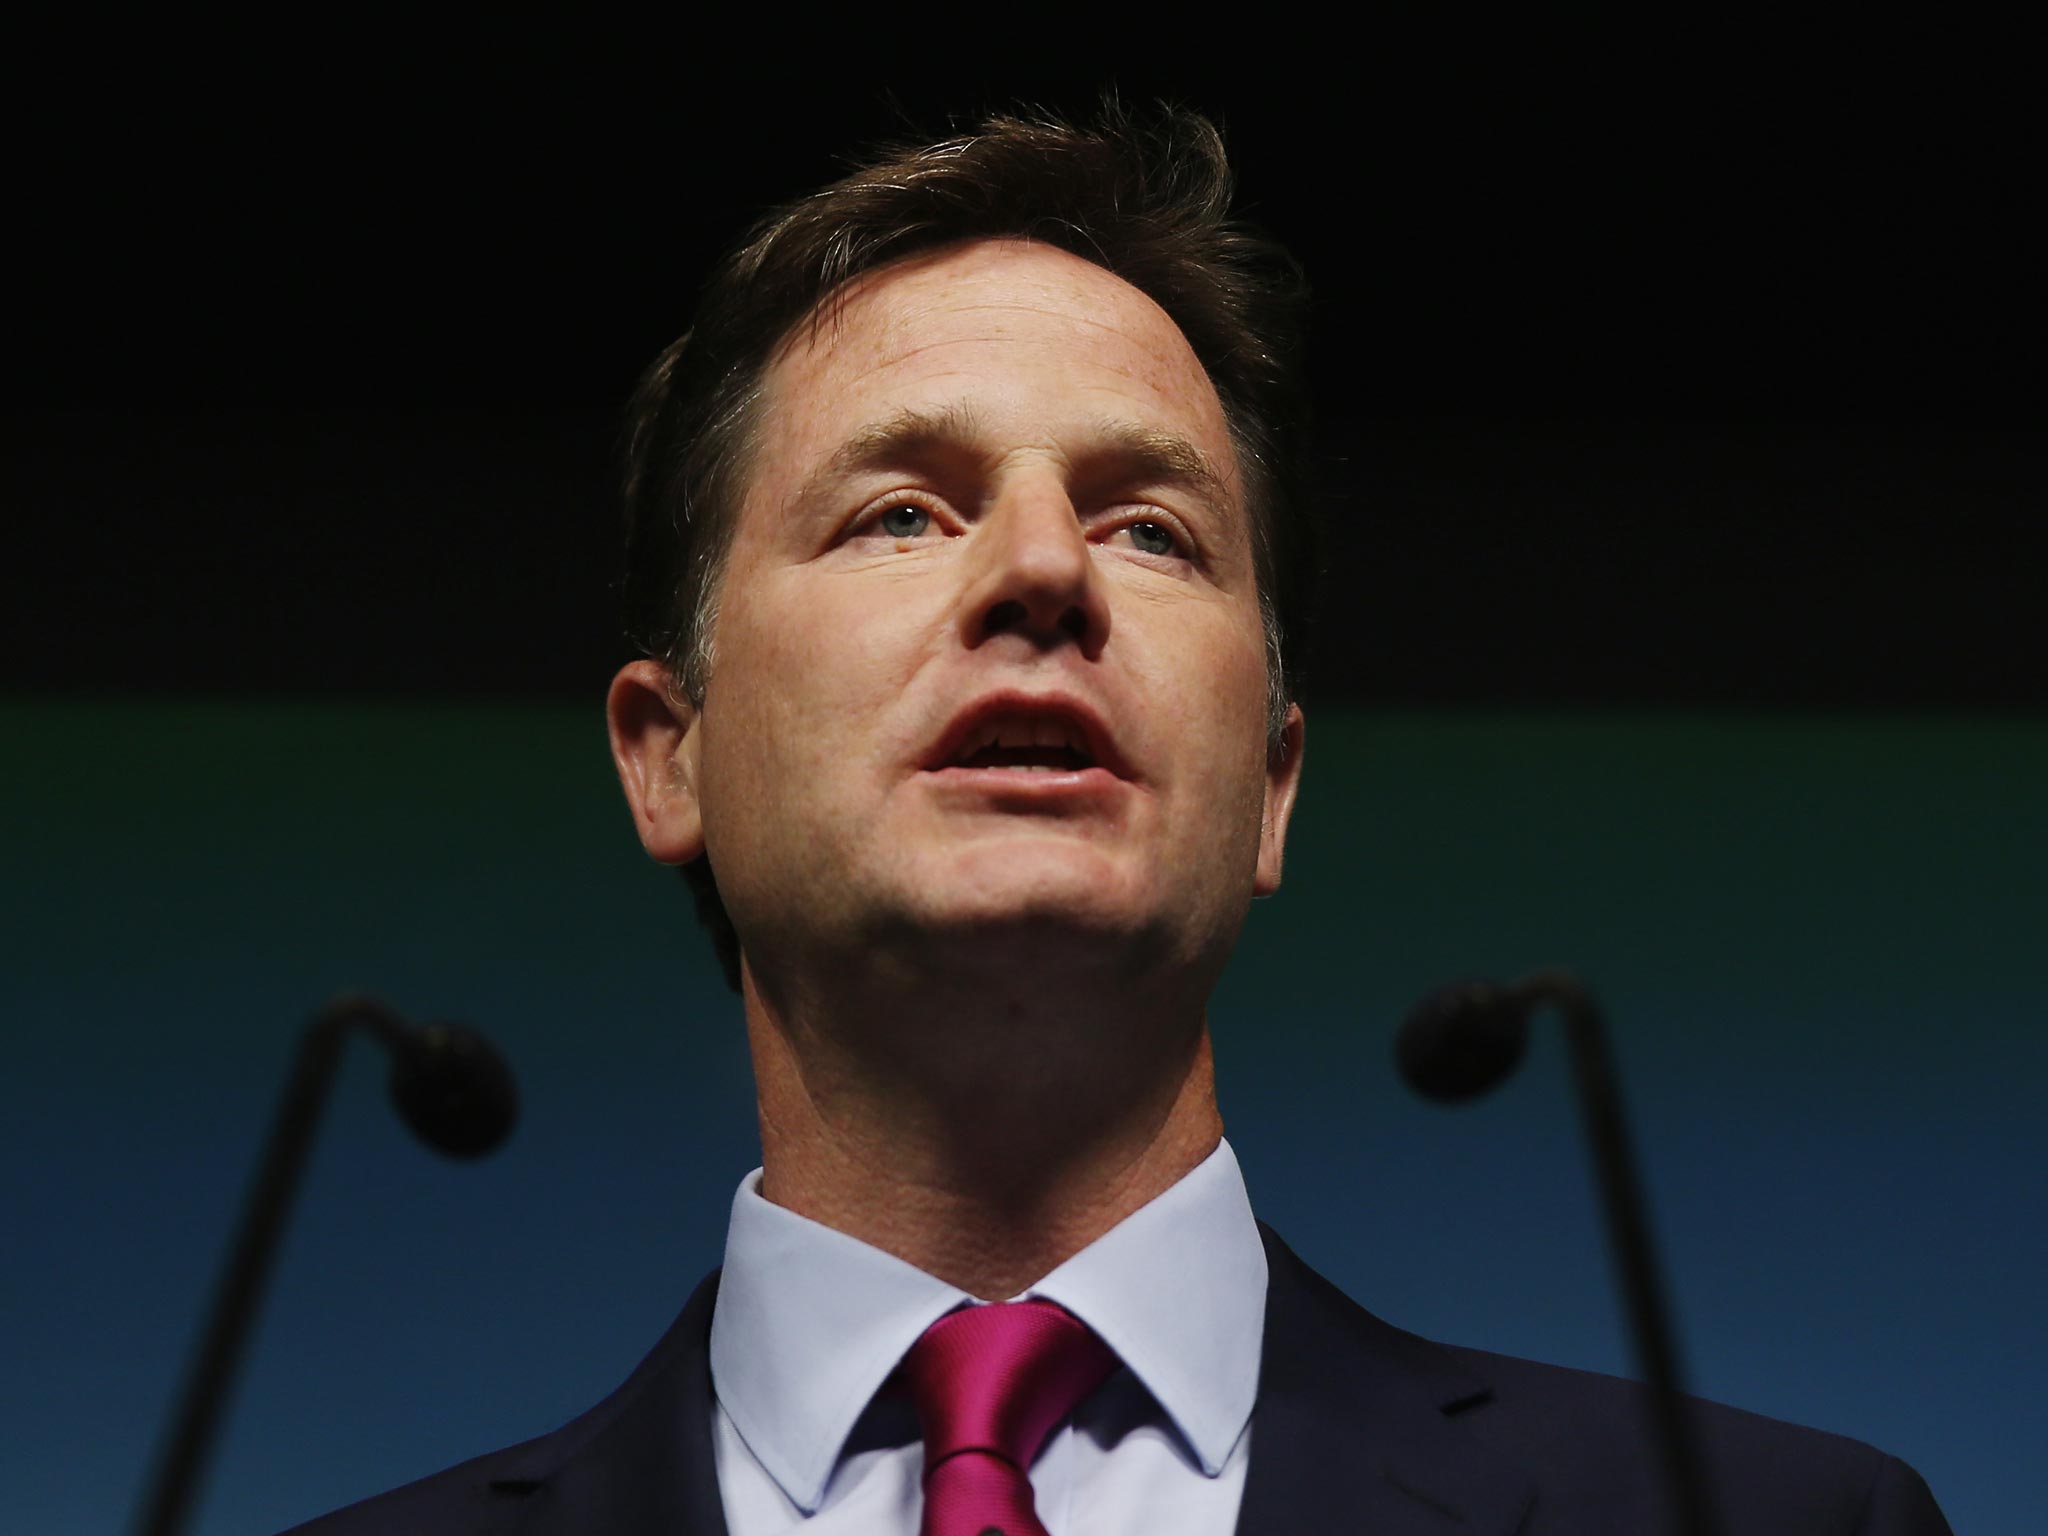 Policy Exchange, a Conservative think tank, claims that Nick Clegg's spending plans do not add up